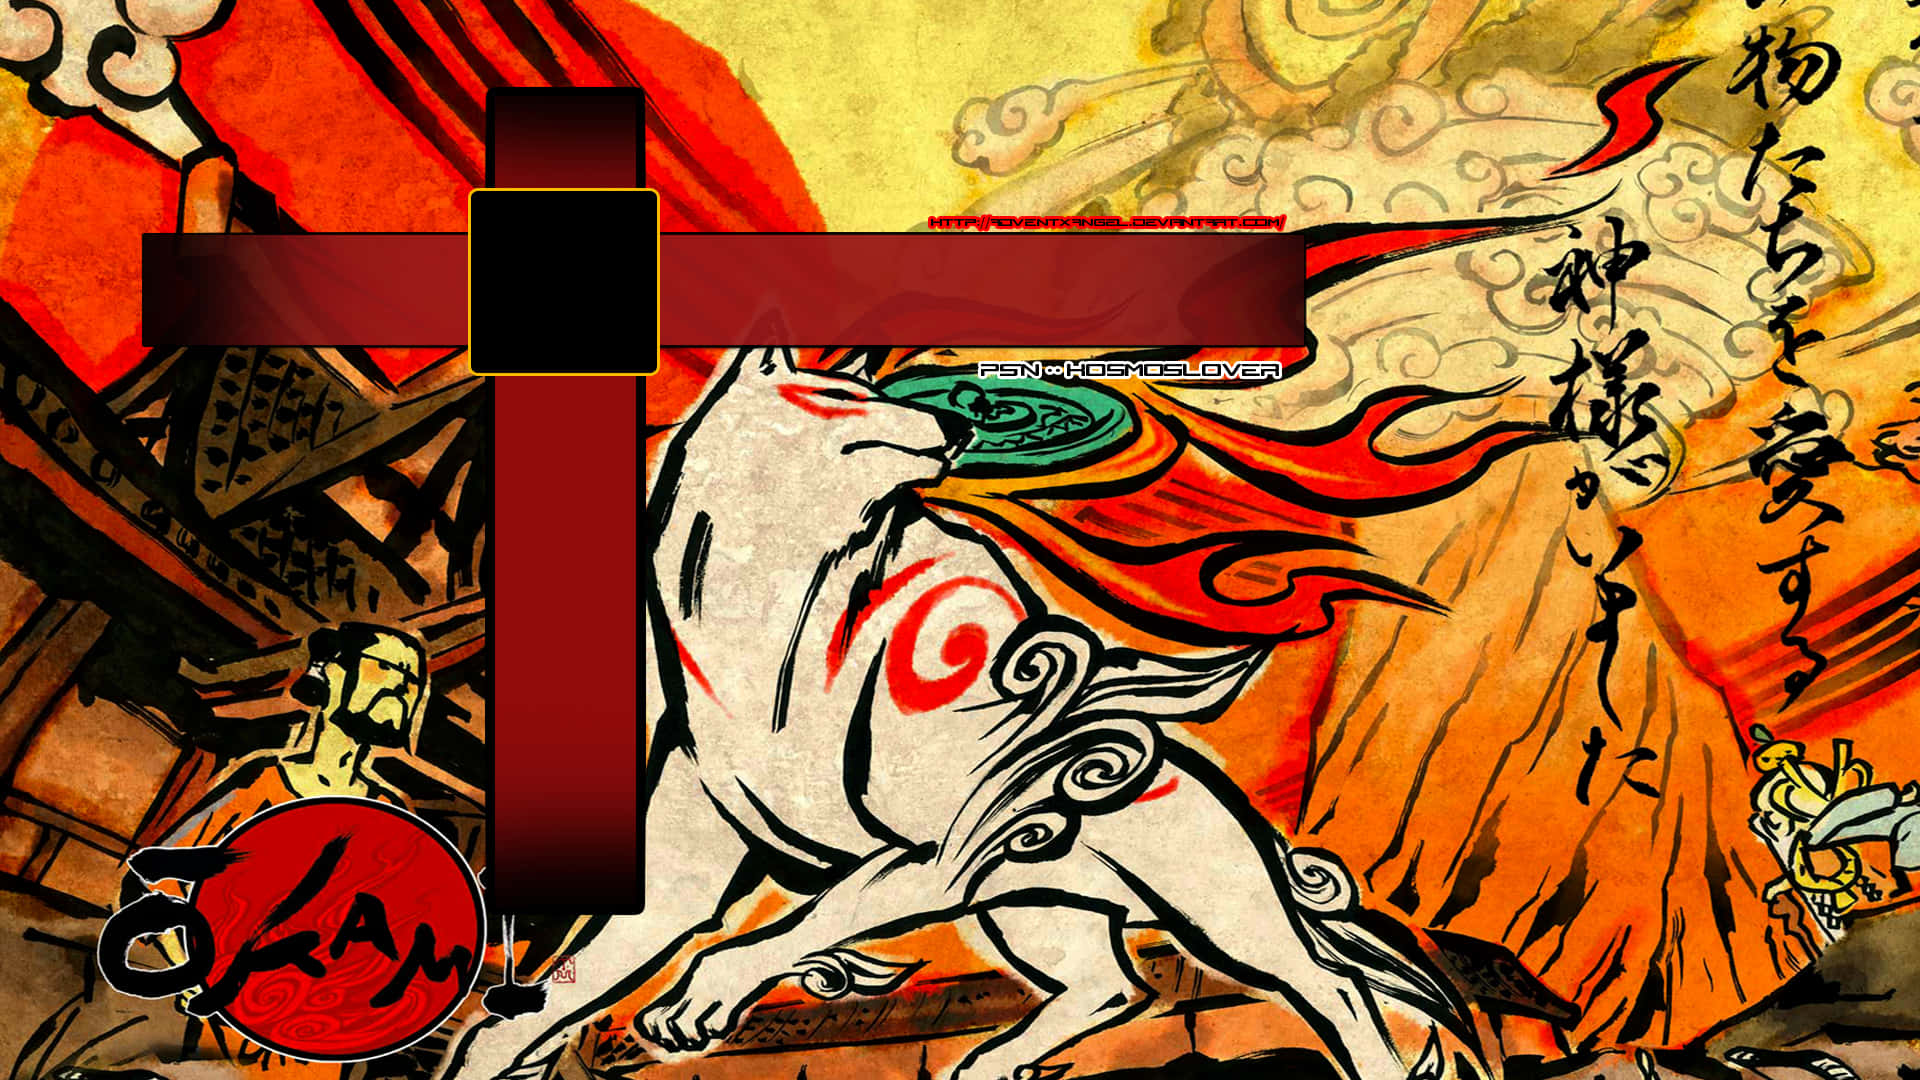 "The spirit of good and evil depicted in Okami HD's stunning visuals" Wallpaper